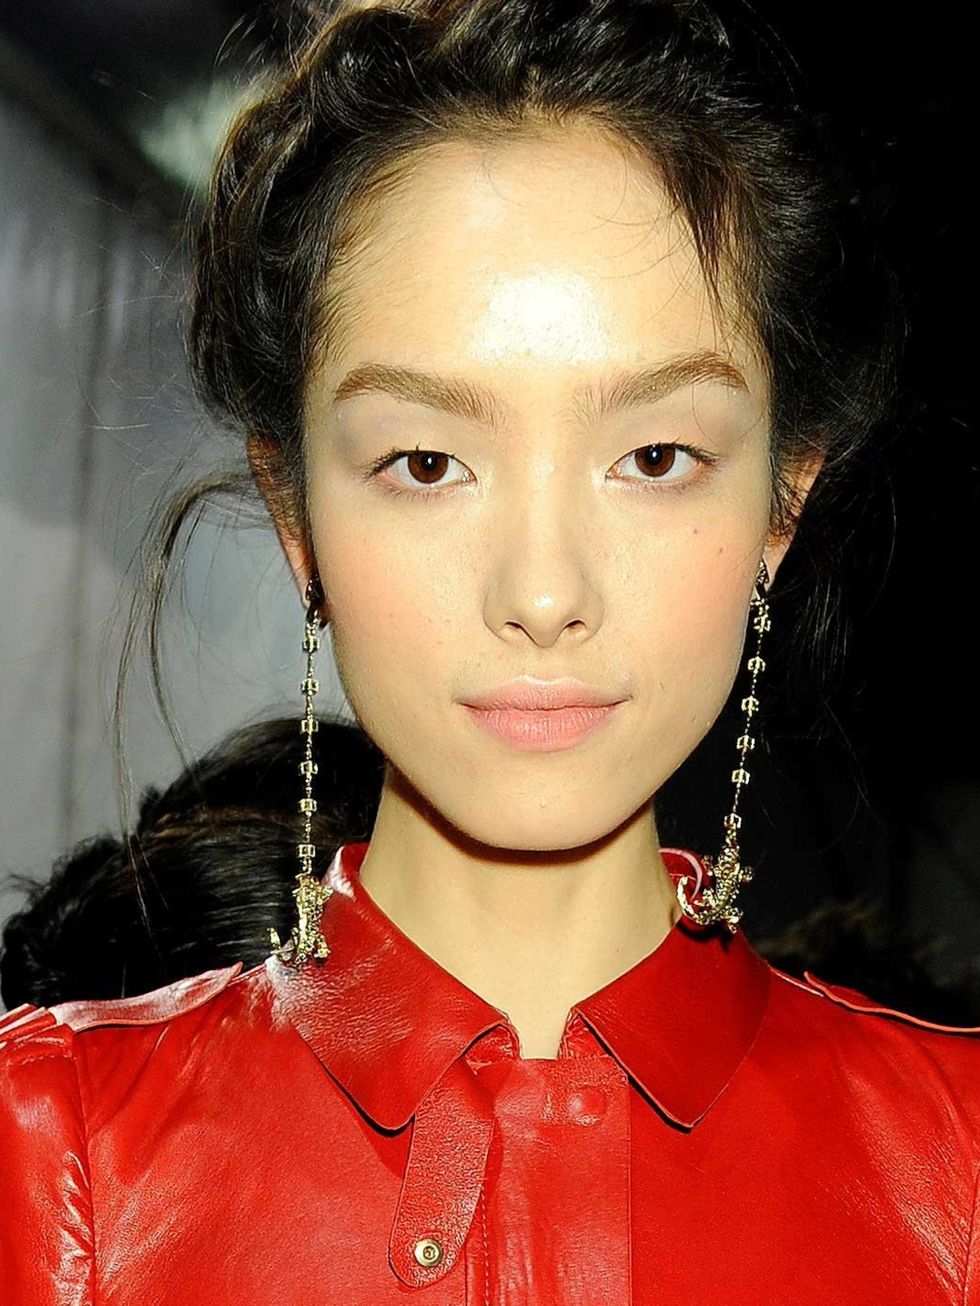 <p><strong>Who:</strong> Fei Fei Sun</p><p><strong>Born:</strong> 1989 in HeiBei, China</p><p>Fei Fei is everywhere, from appearing in SS12 campaigns for Valentino, walking for Dior, Thierry Mugler, Sonia Rykiel, Miu Miu and Elie Saab at their SS12 catwal